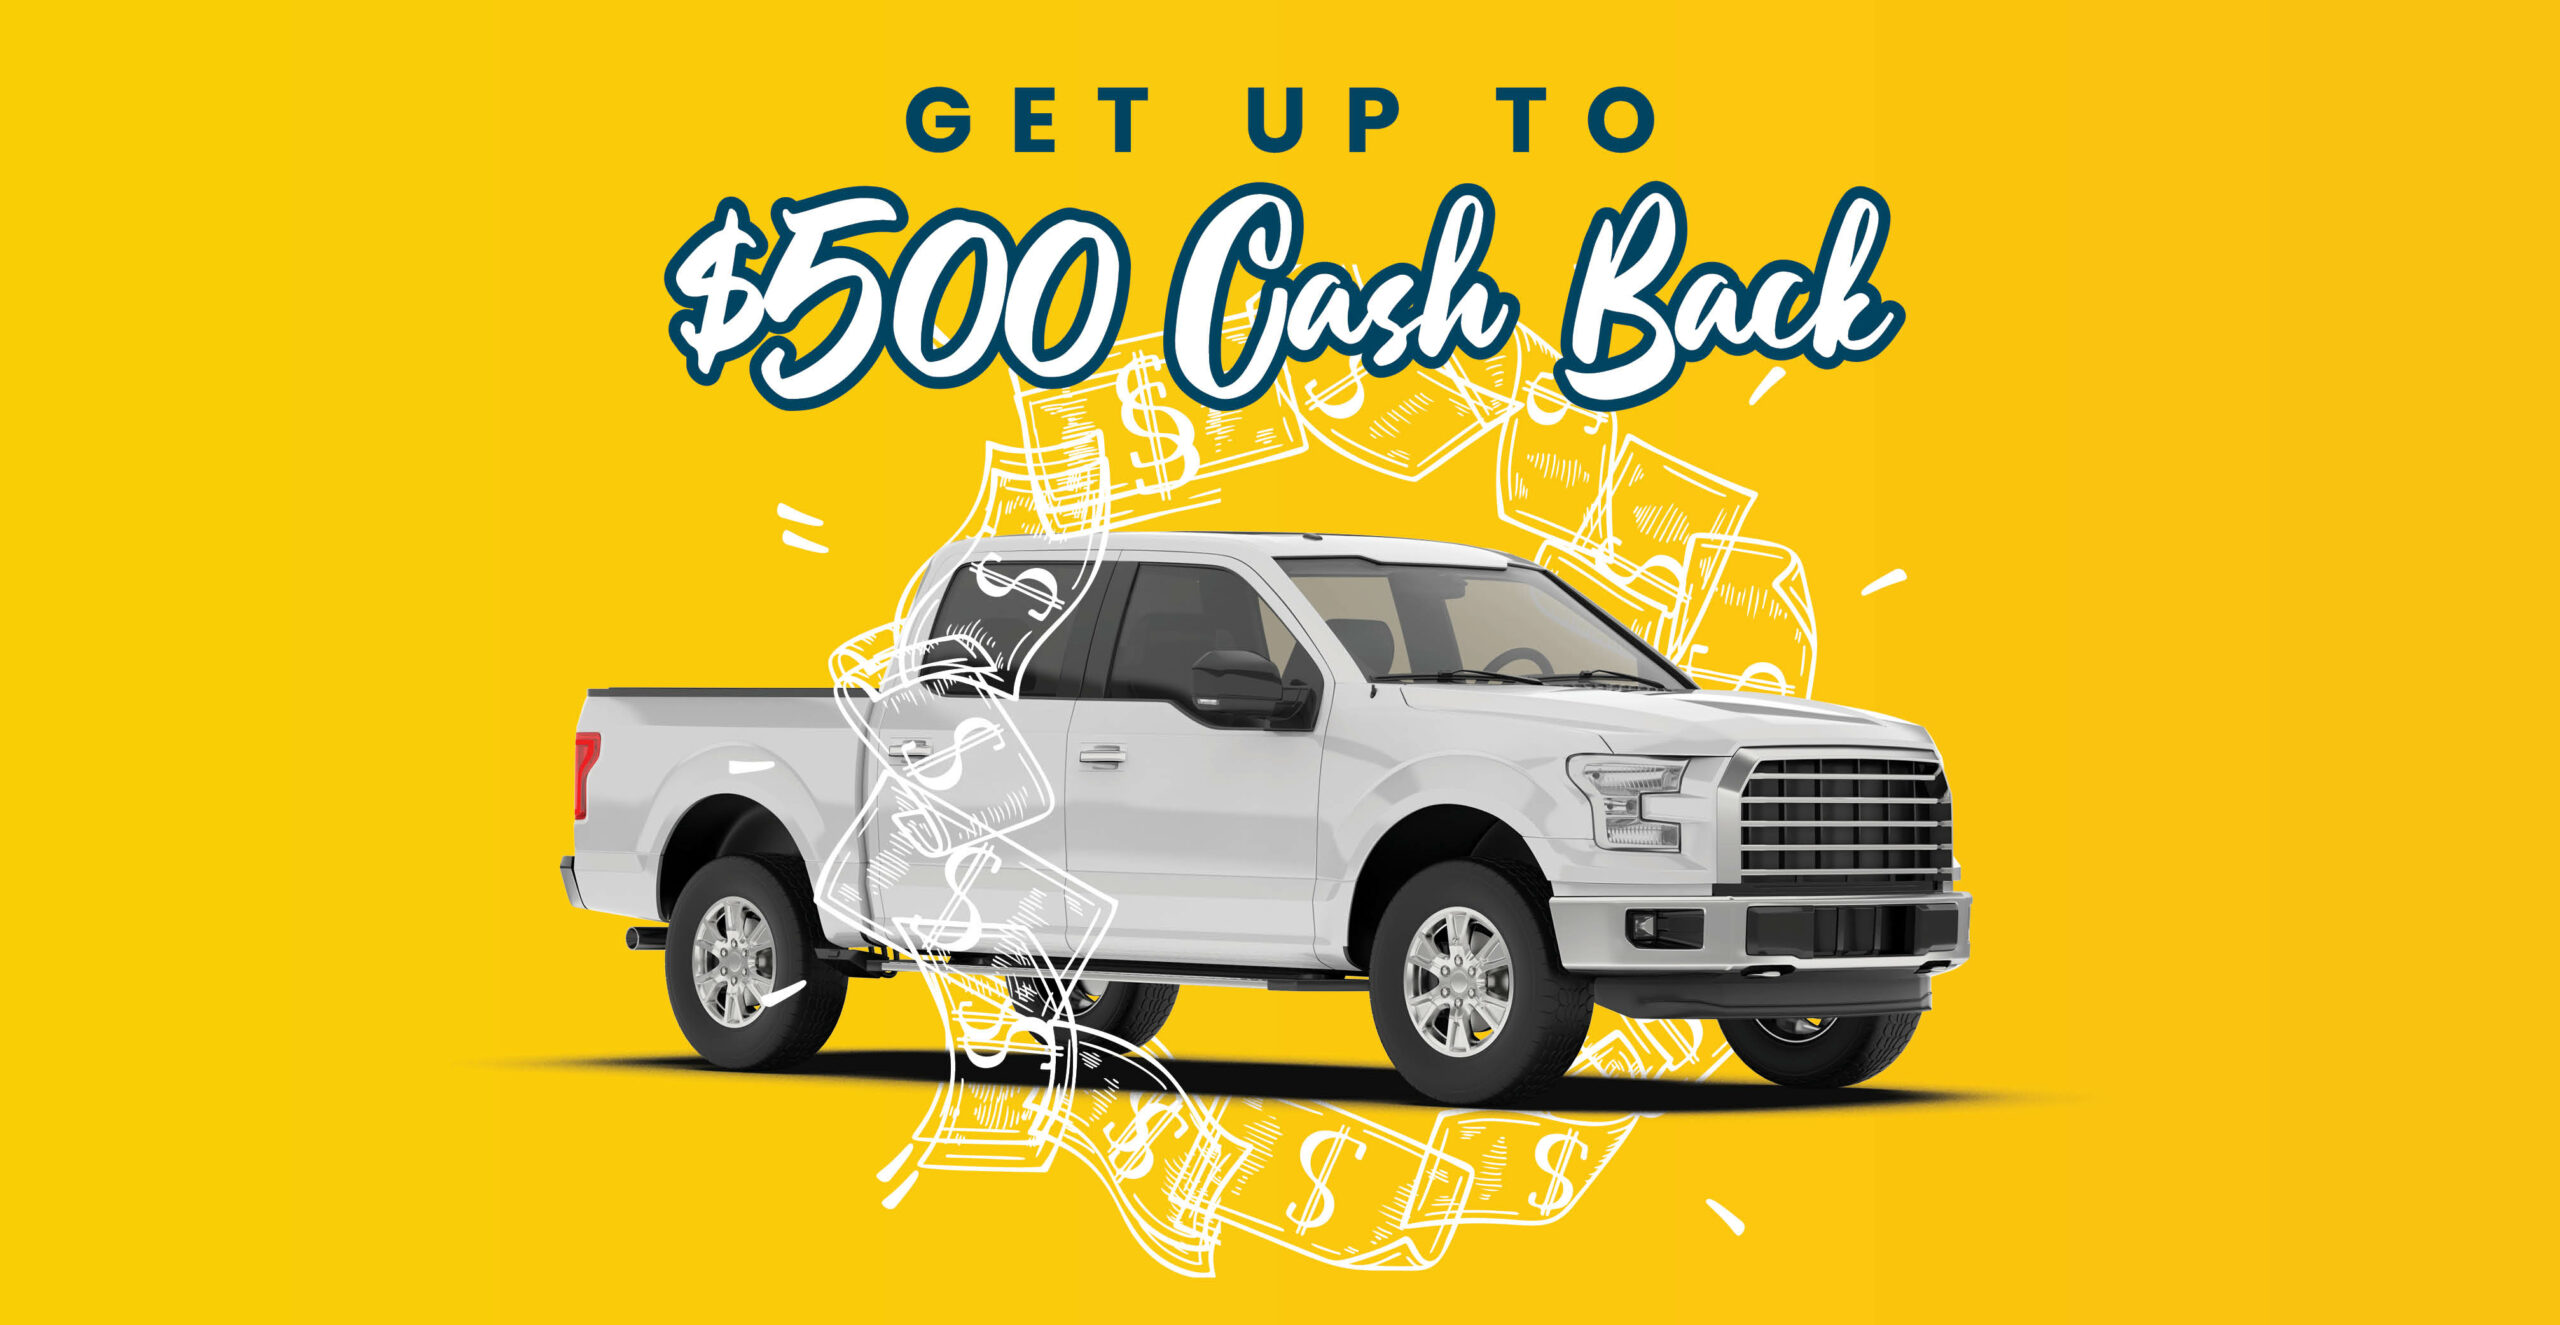 Get up to $500 cash back when you finance you auto loan from another lender